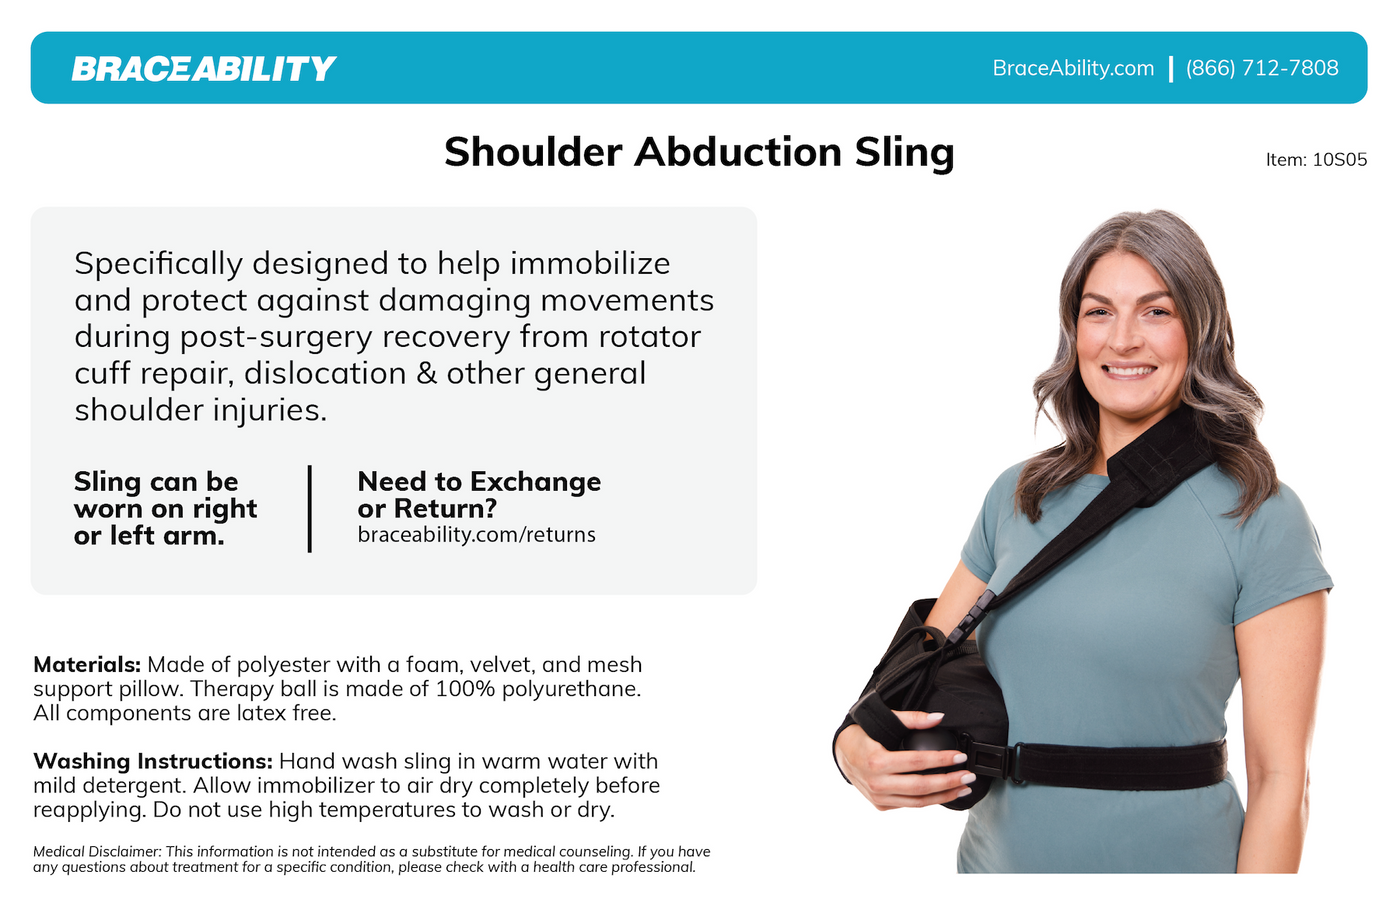 To clean the braceability shoulder abduction sling, hand wash in warm water with mild detergent. Air dry completely before reapplying